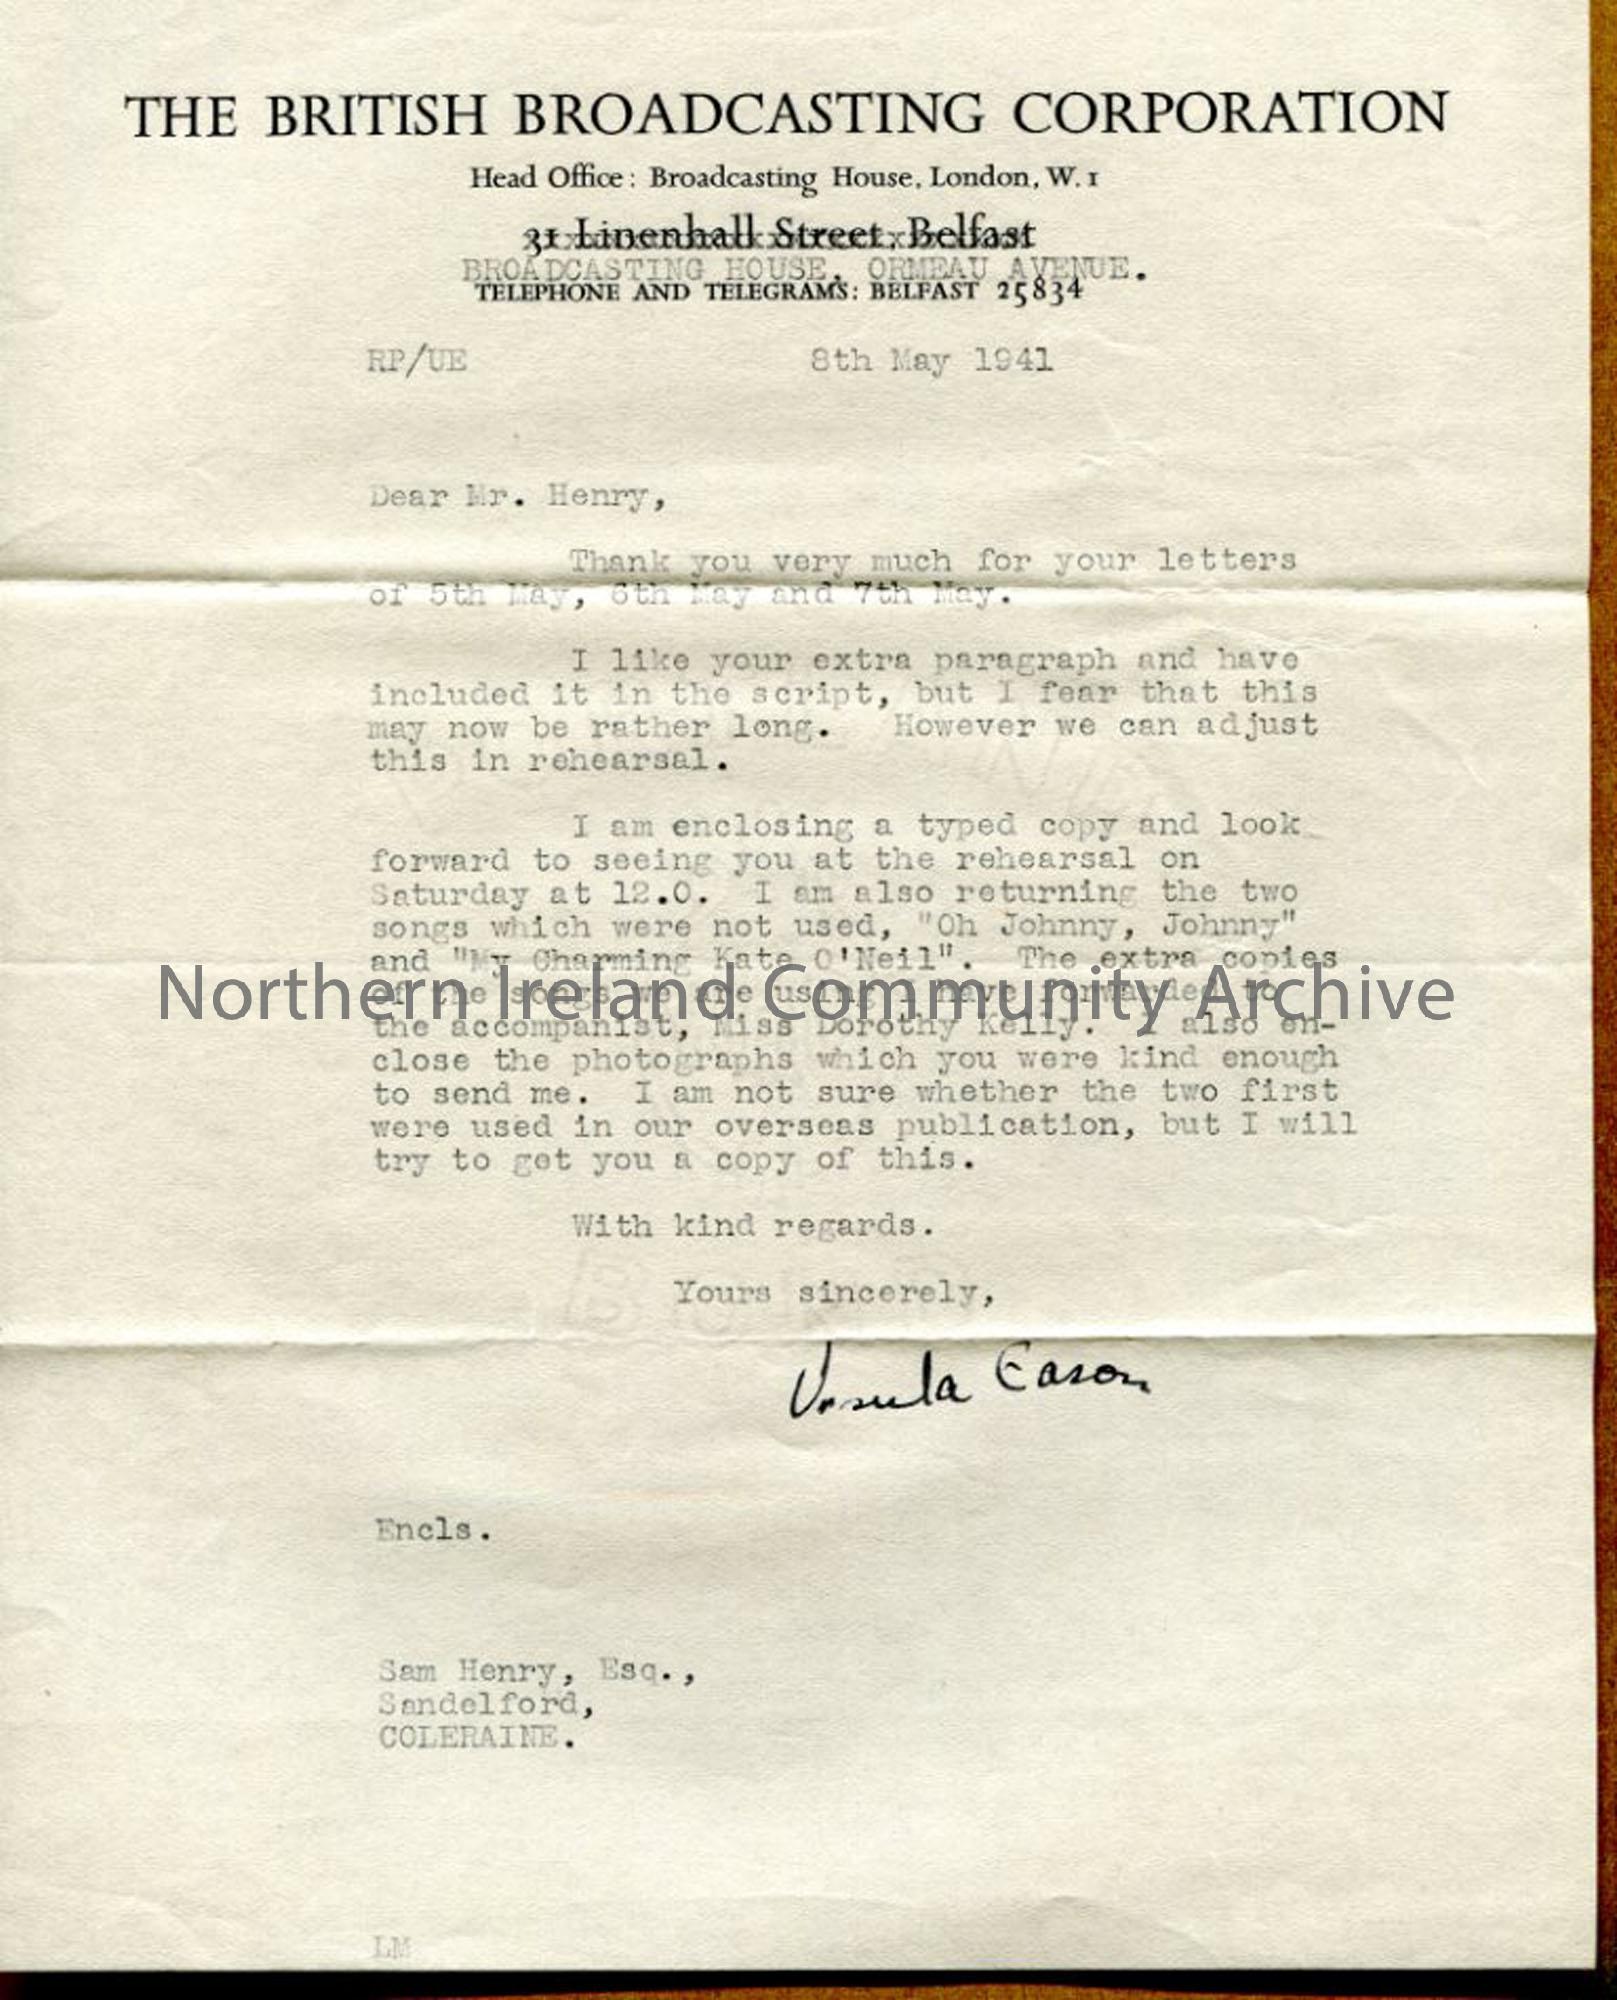 Letter from Ursula Eason of the BBC, dated 8.5.1941